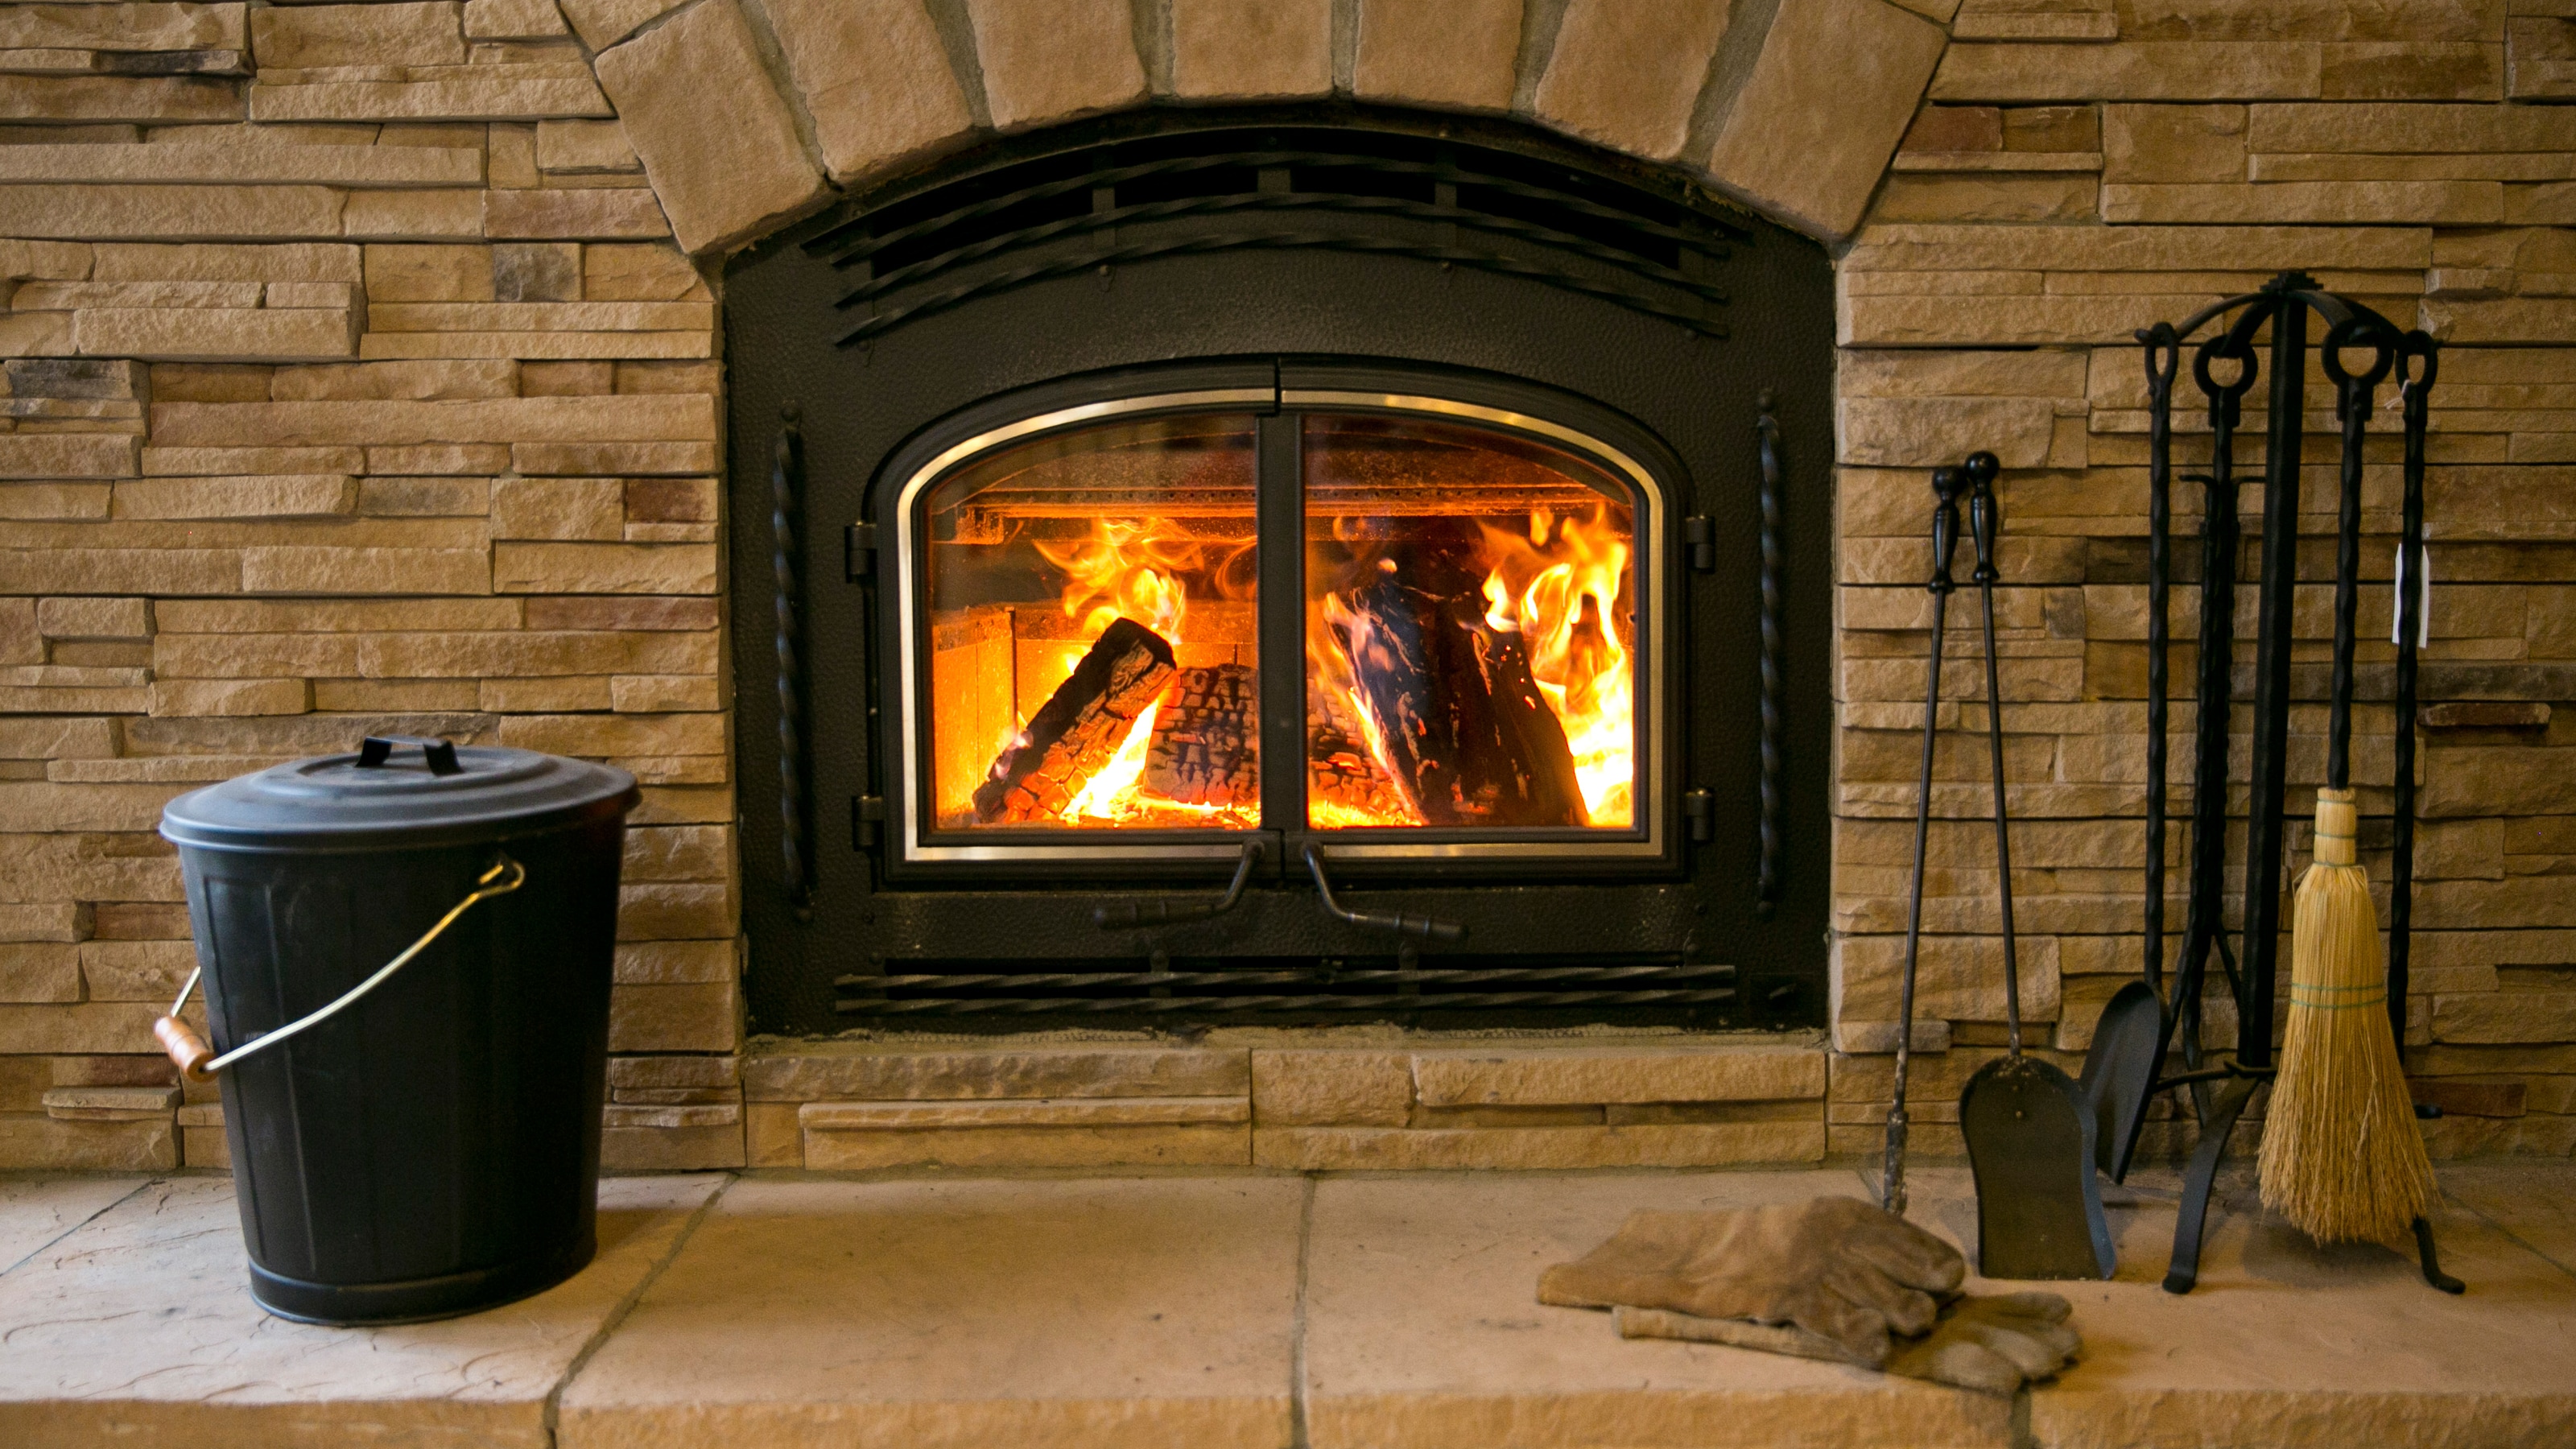 How to Vent A Gas Fireplace without A Chimney New How to Convert A Gas Fireplace to Wood Burning